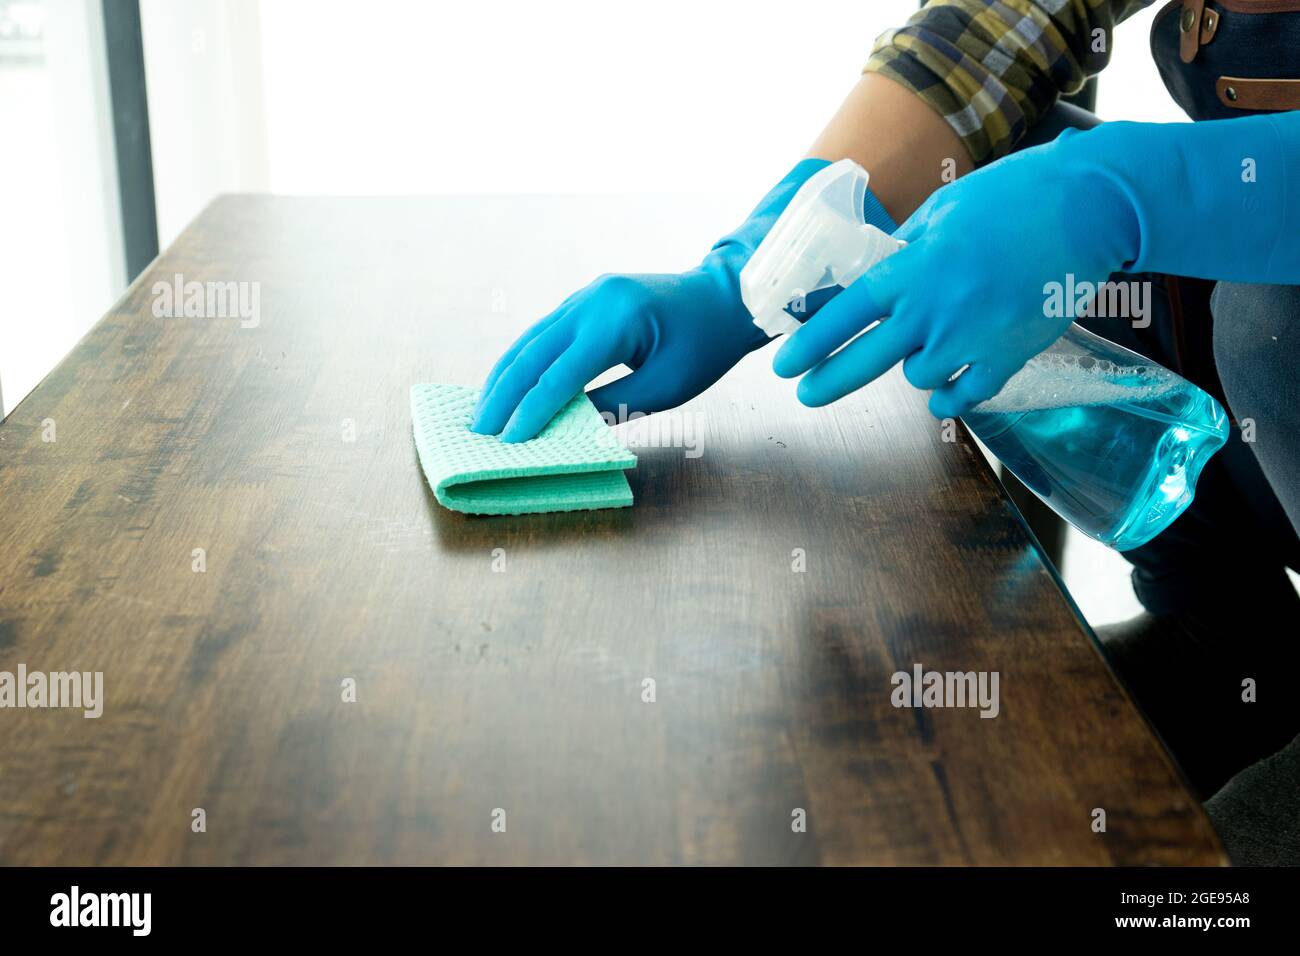 https://c8.alamy.com/comp/2GE95A8/staff-are-cleaning-the-table-top-using-cloth-and-disinfectant-for-clean-and-disease-prevention-covid-19-2GE95A8.jpg